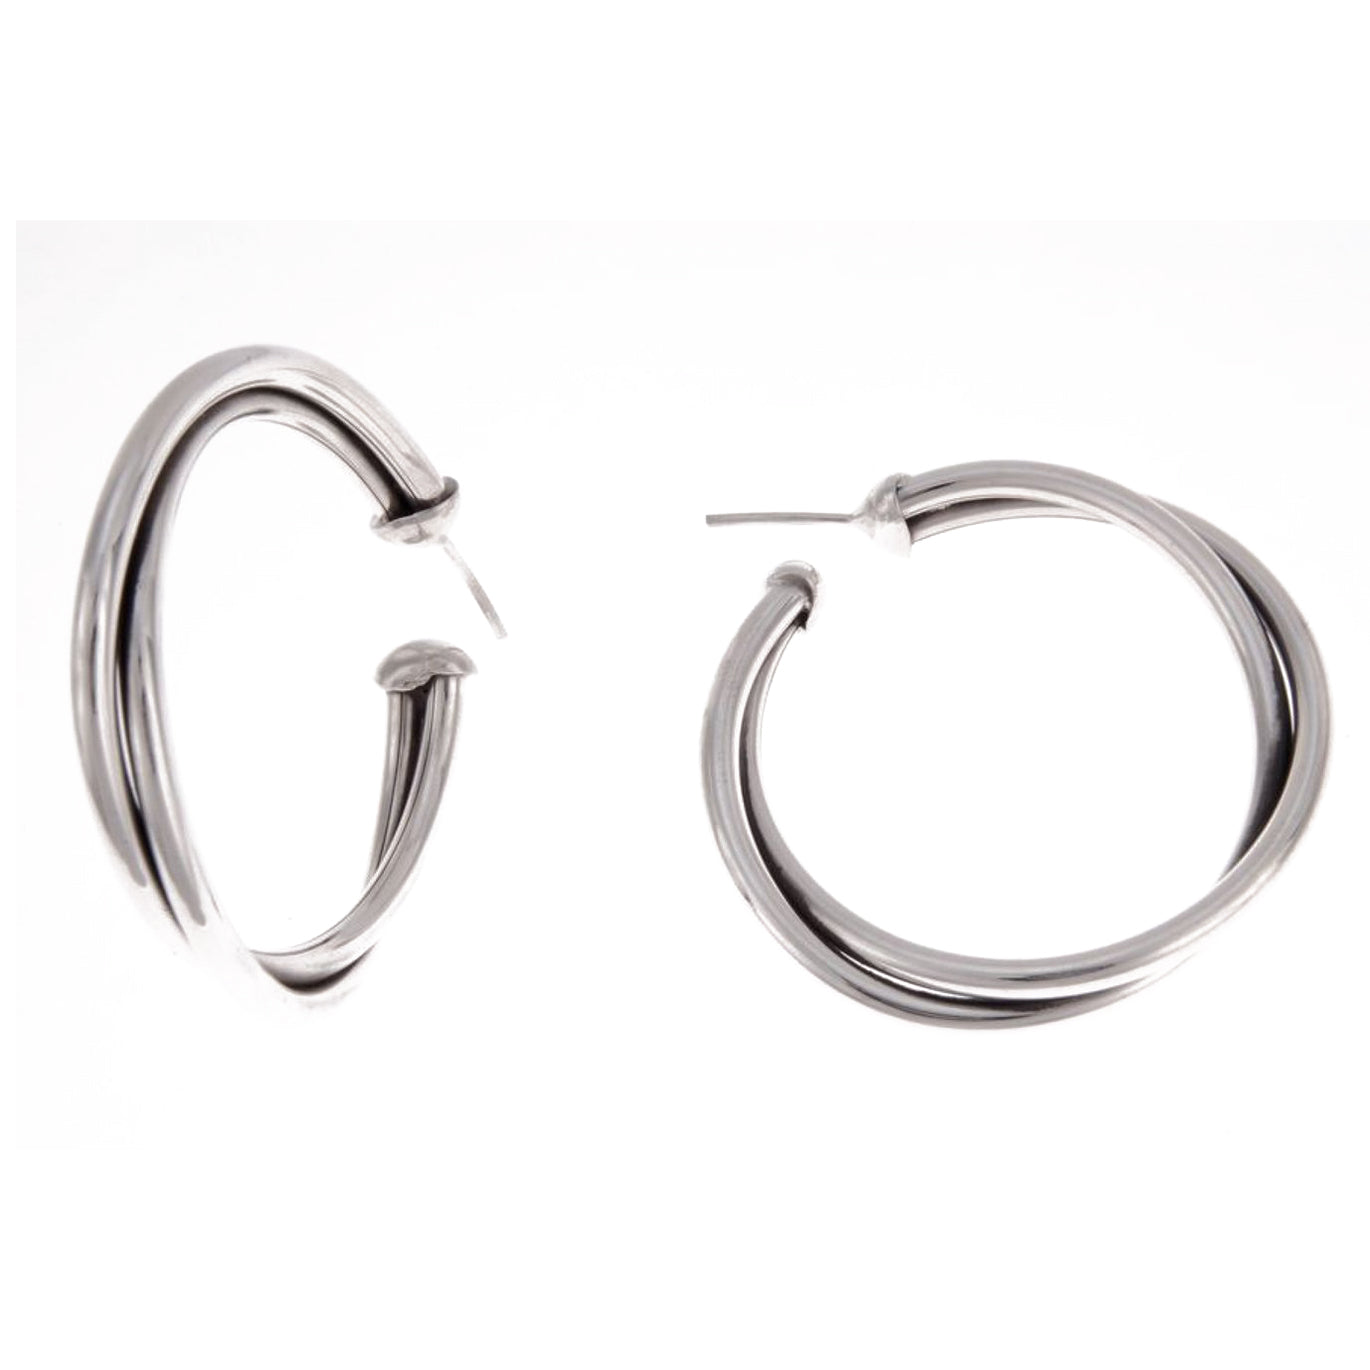 Out of Mexico Crossover tubed Hoop Earrings